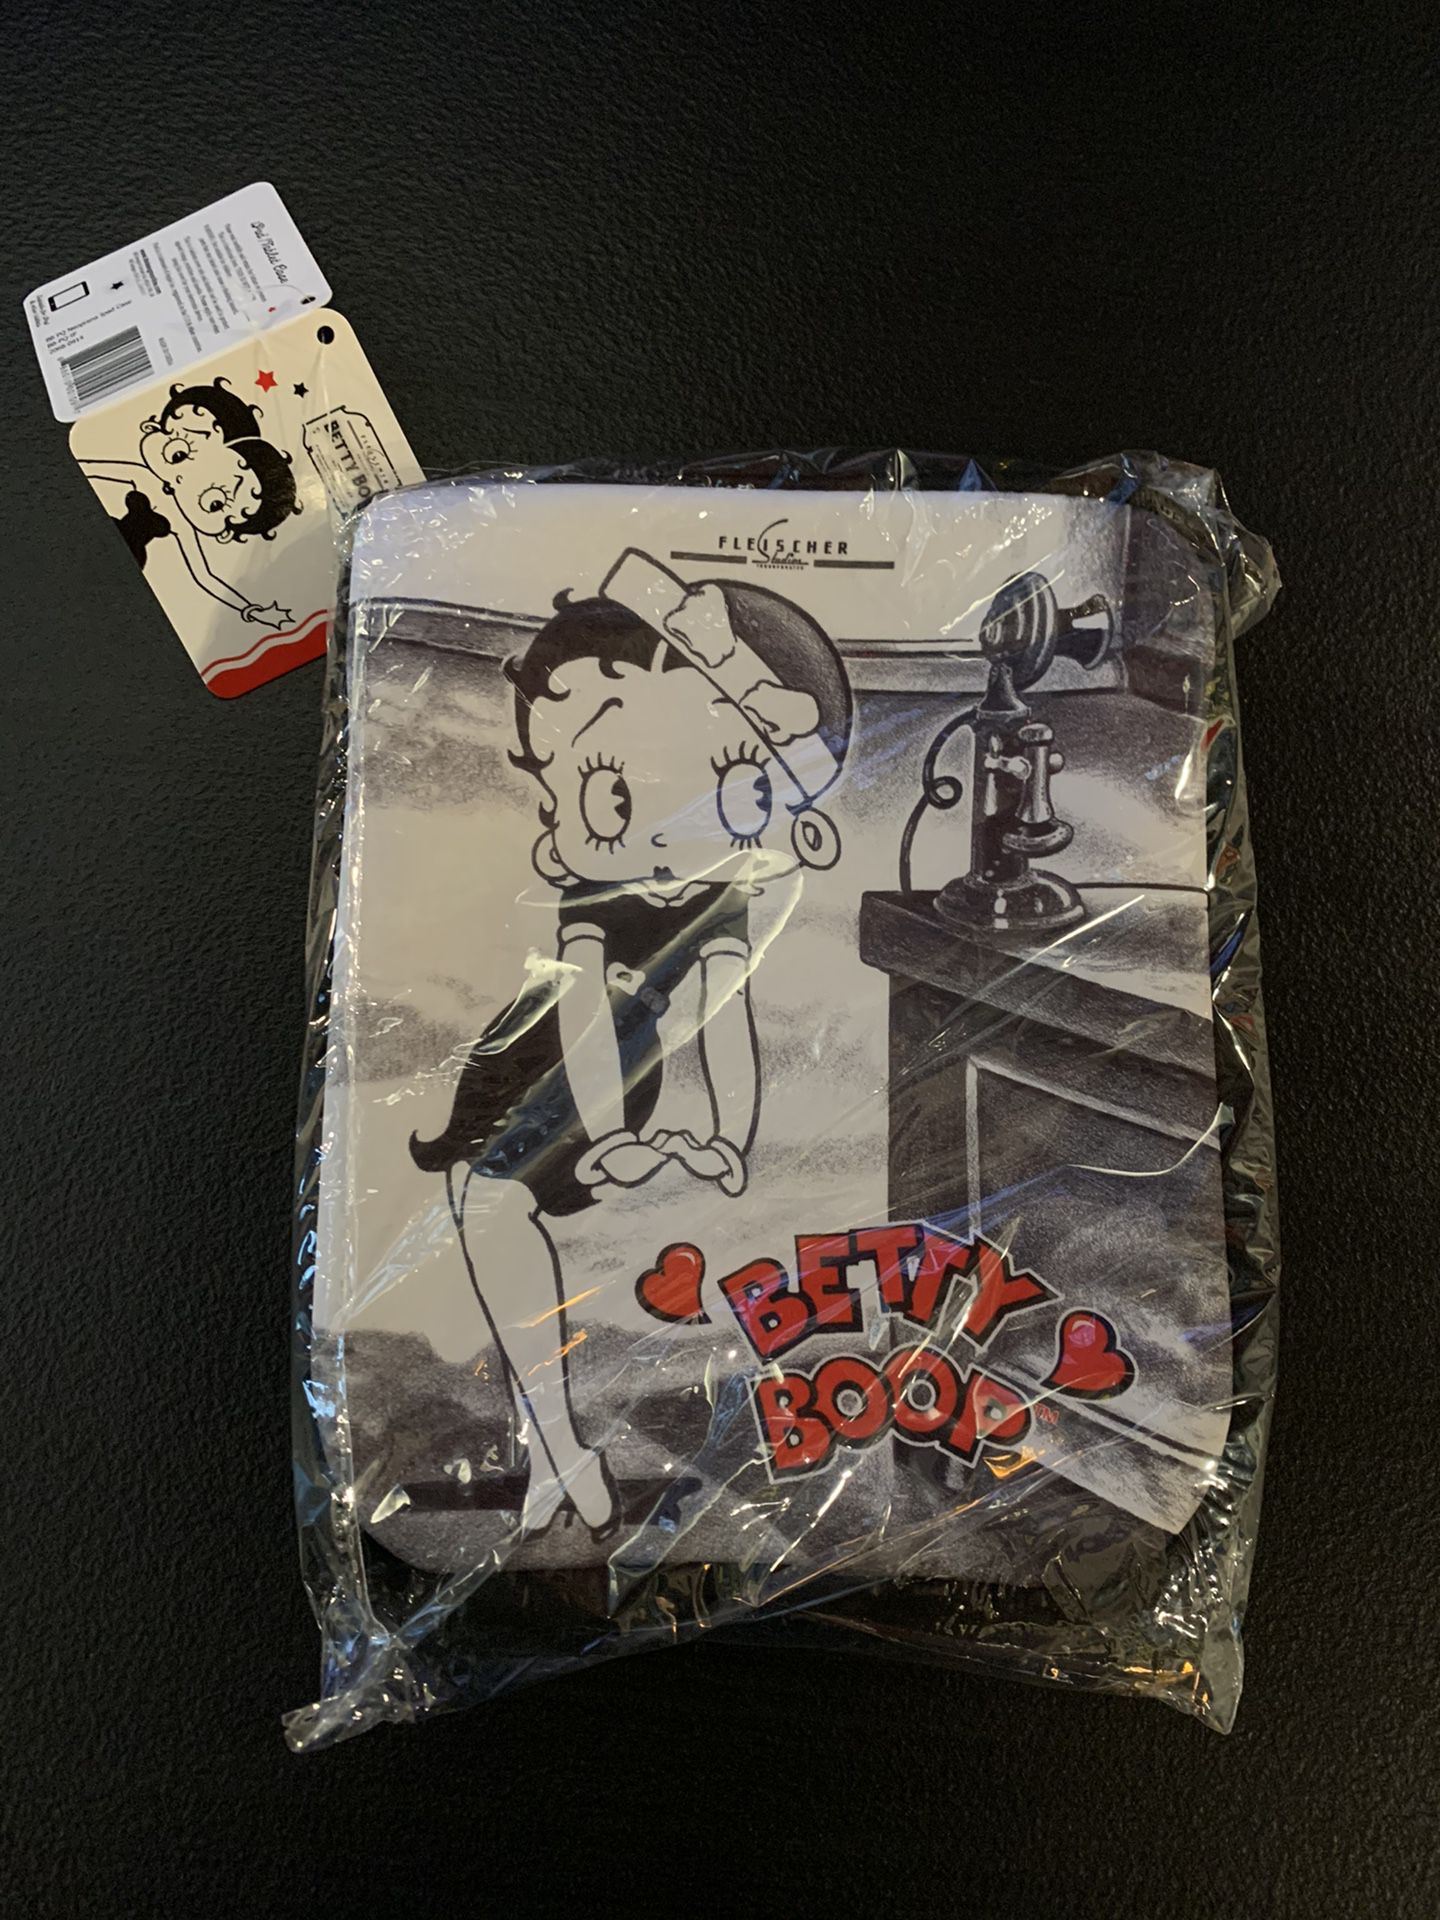 Betty Boop iPad/tablet soft cover!! ❤️ ❤️